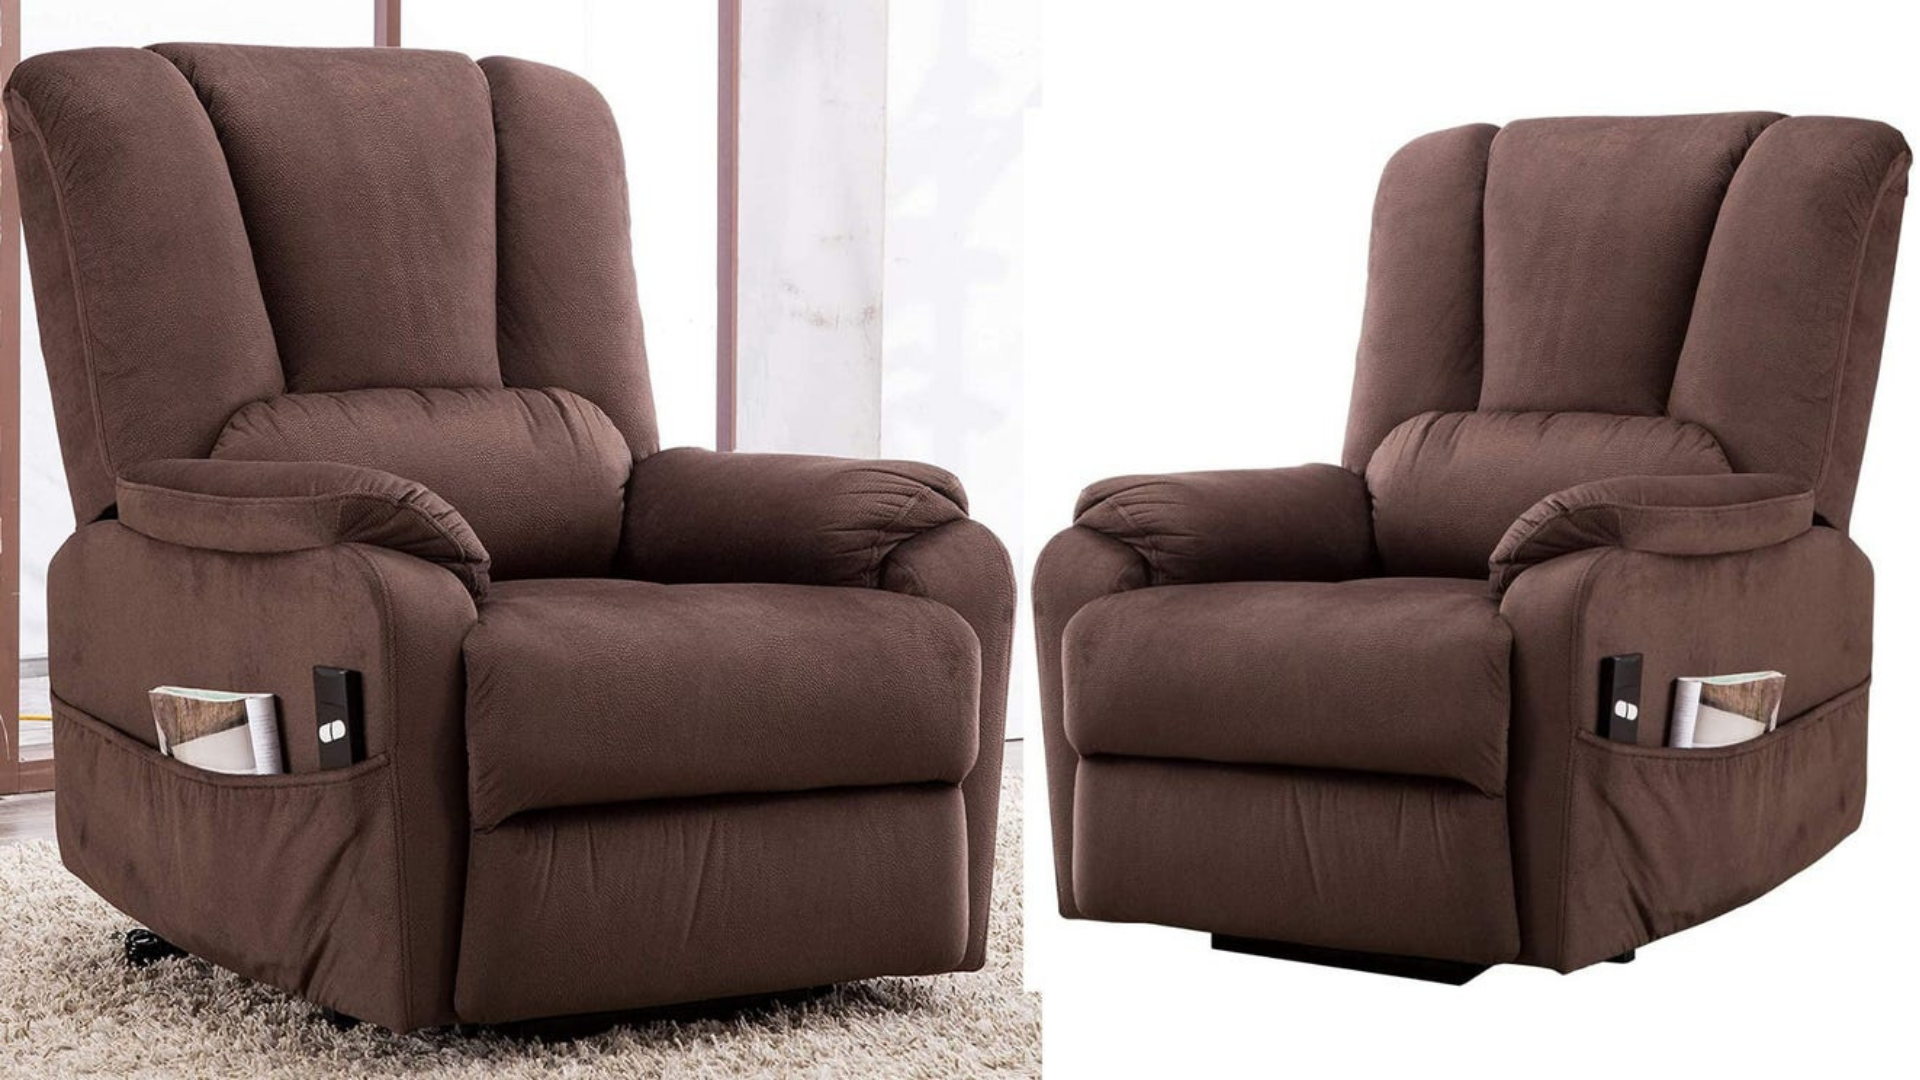 These recliners cost $500 or less